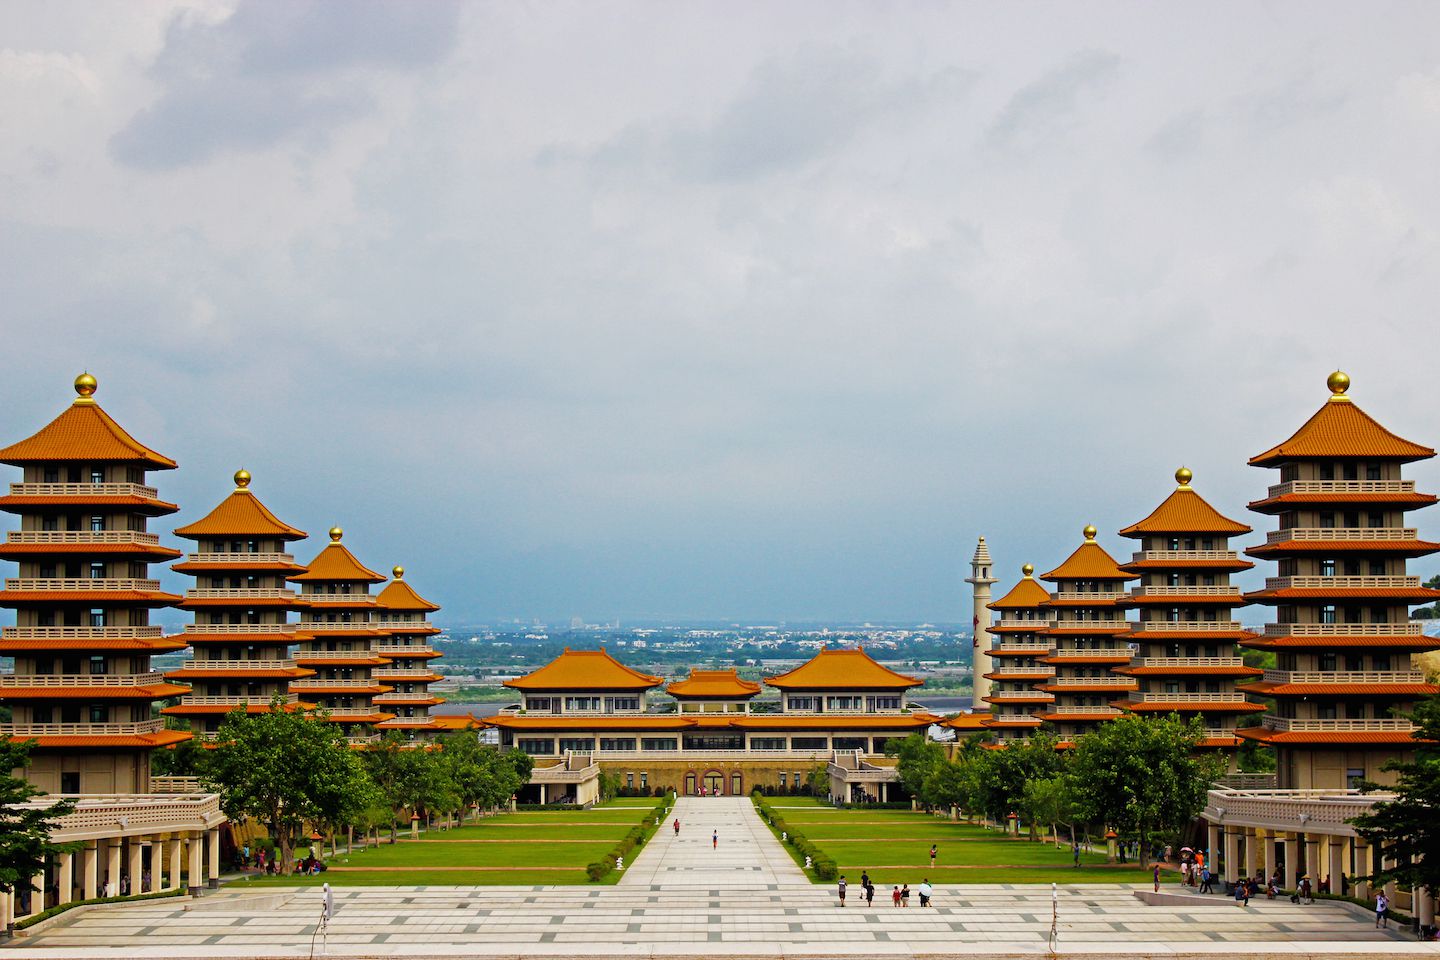 View of the 8 pagodas